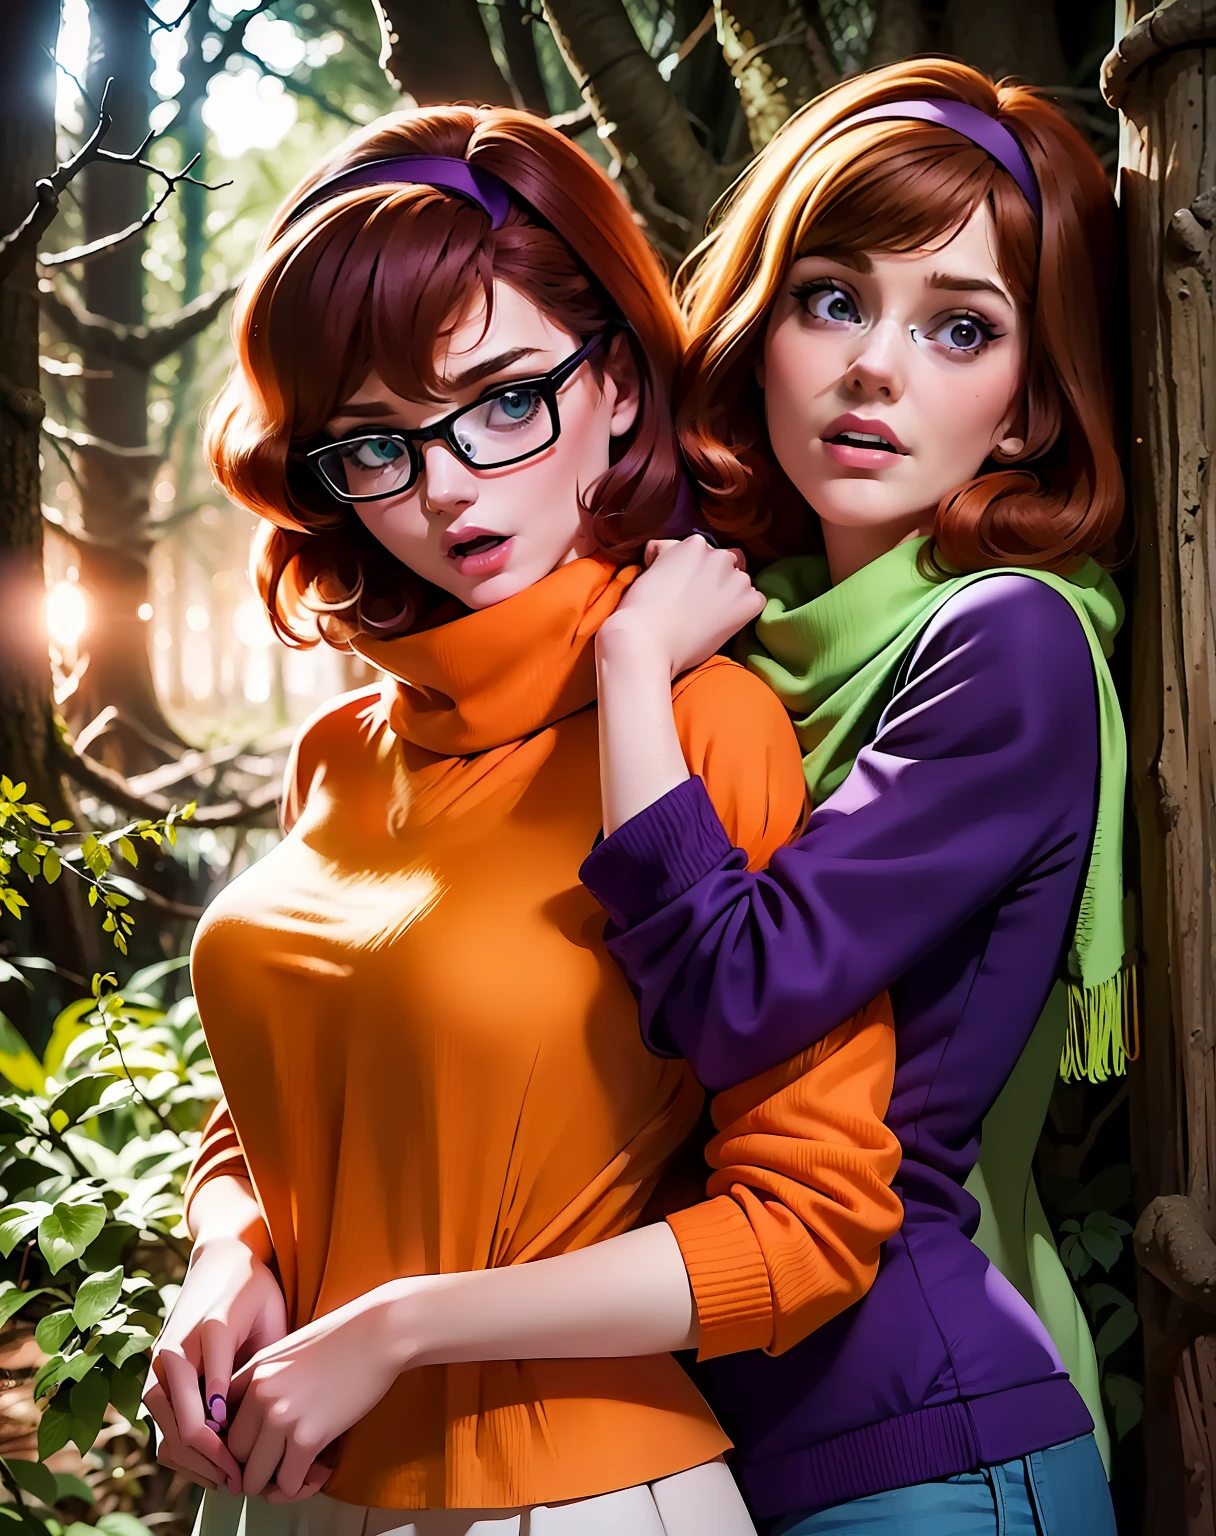 two girls hugging outdoors, velma (velma short hair, mop hairstyle no hairband), and, her friend, Daphne, (she has big 60s style long orange brown hair with a purple hairband), and a purple sweater and green scarf, velma has thick glasses, daphne no glasses, both are very pretty, good looking, sexy, cute, realistic, beautiful eyes, in the middle of a dark forest, in the woods, forest background, at night, creepy branches, 70s style, evening, both look scared, mouths open, tense, tension, frightened, fright